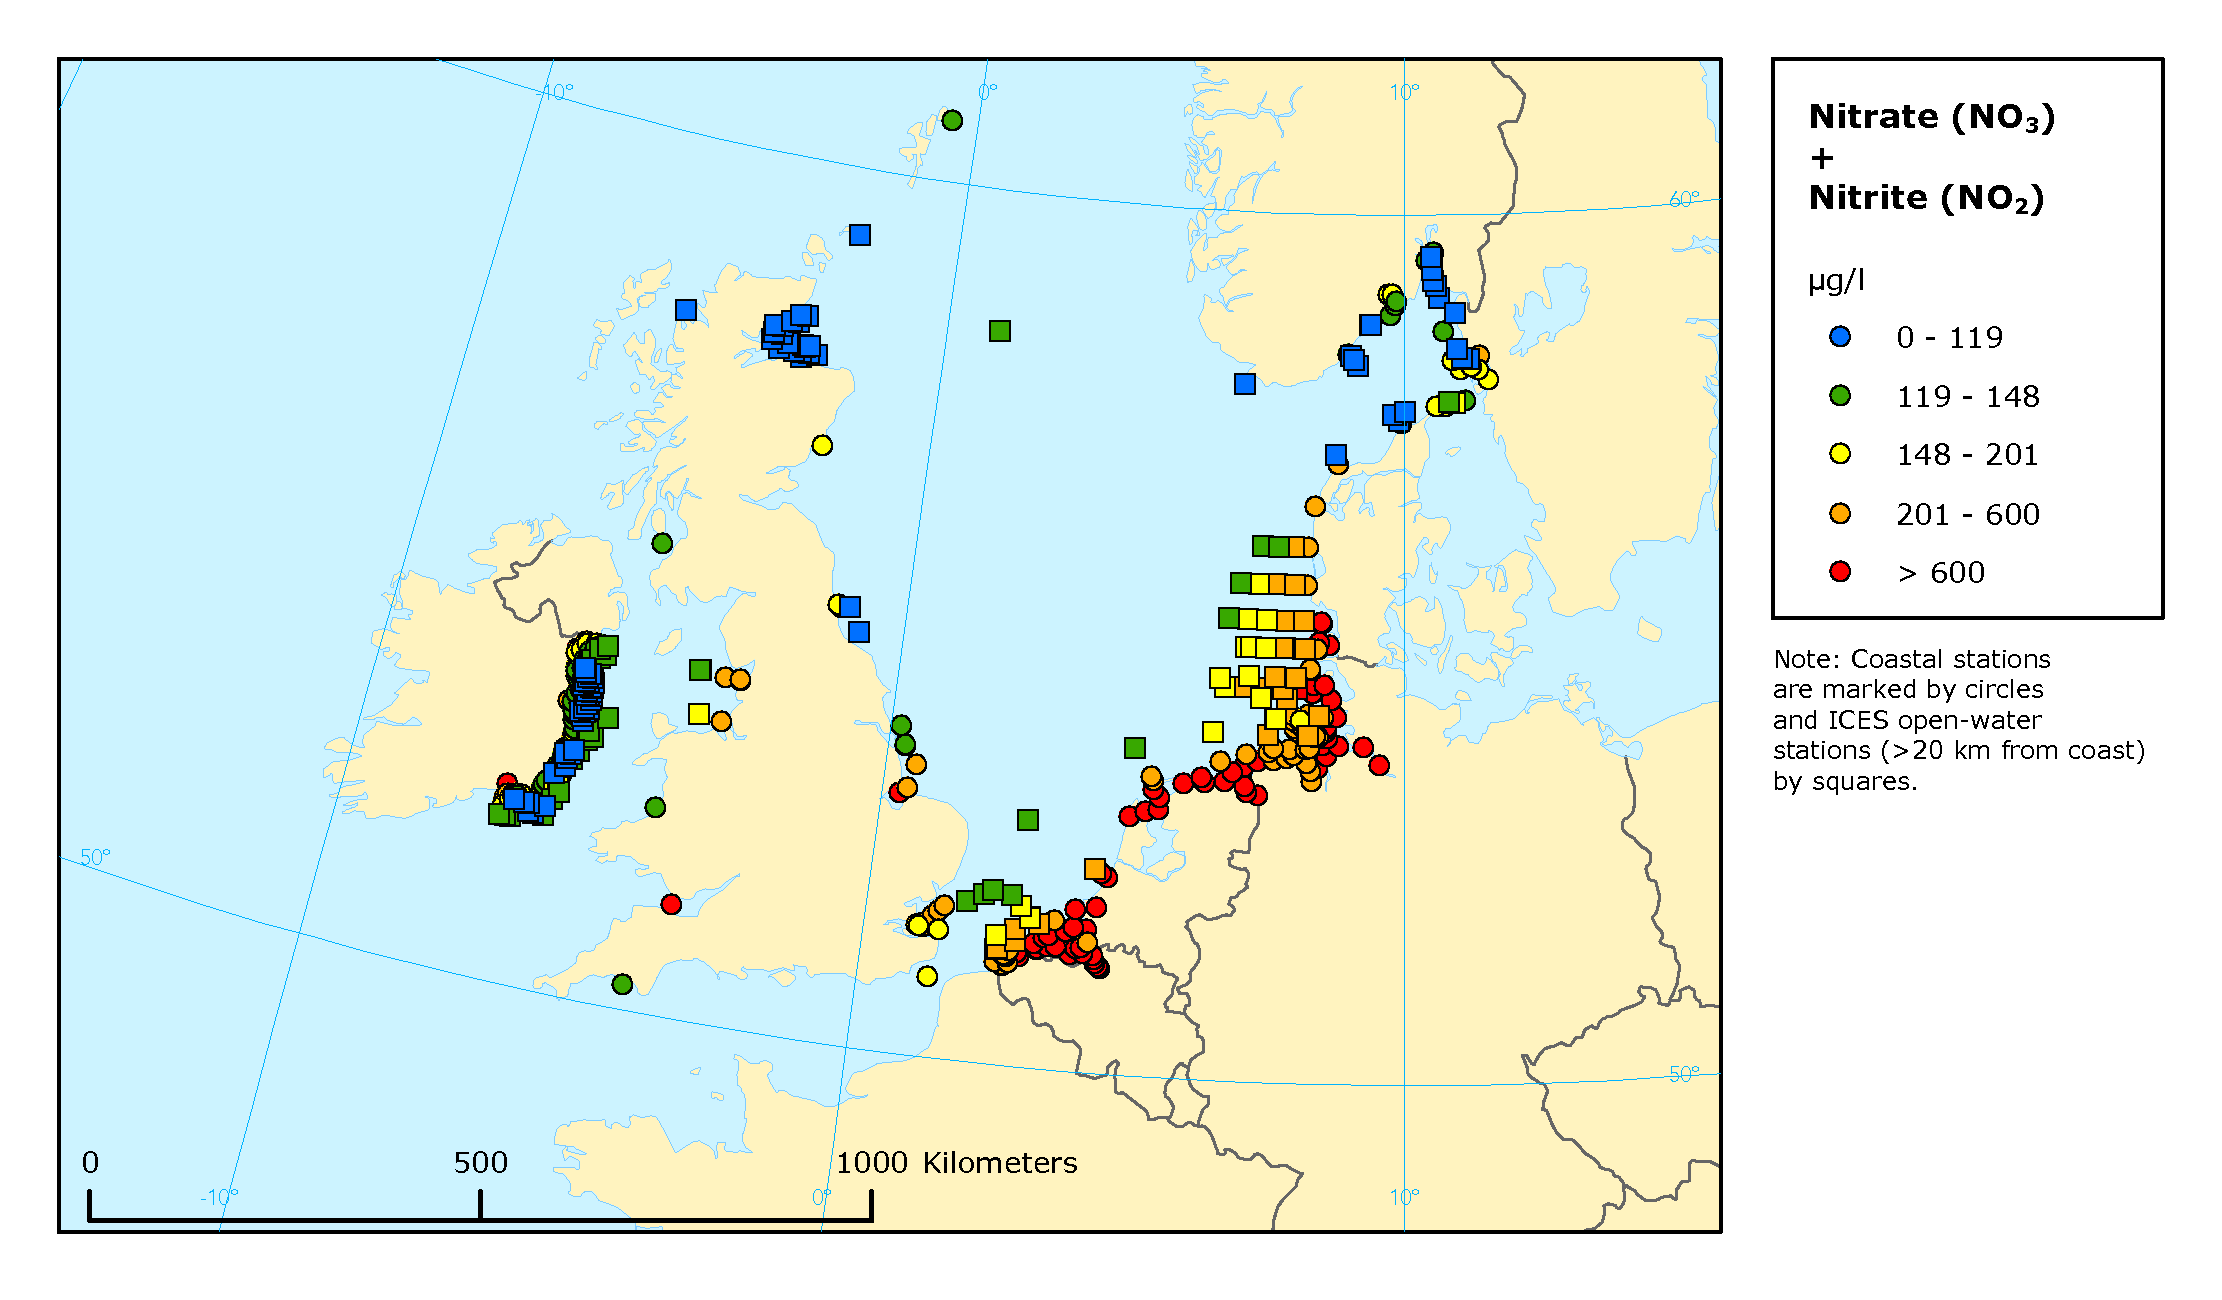 Mean winter surface concentrations of nitrate+nitrite in the Greater North Sea, the Celtic Seas and the Northeast Atlantic, 2003